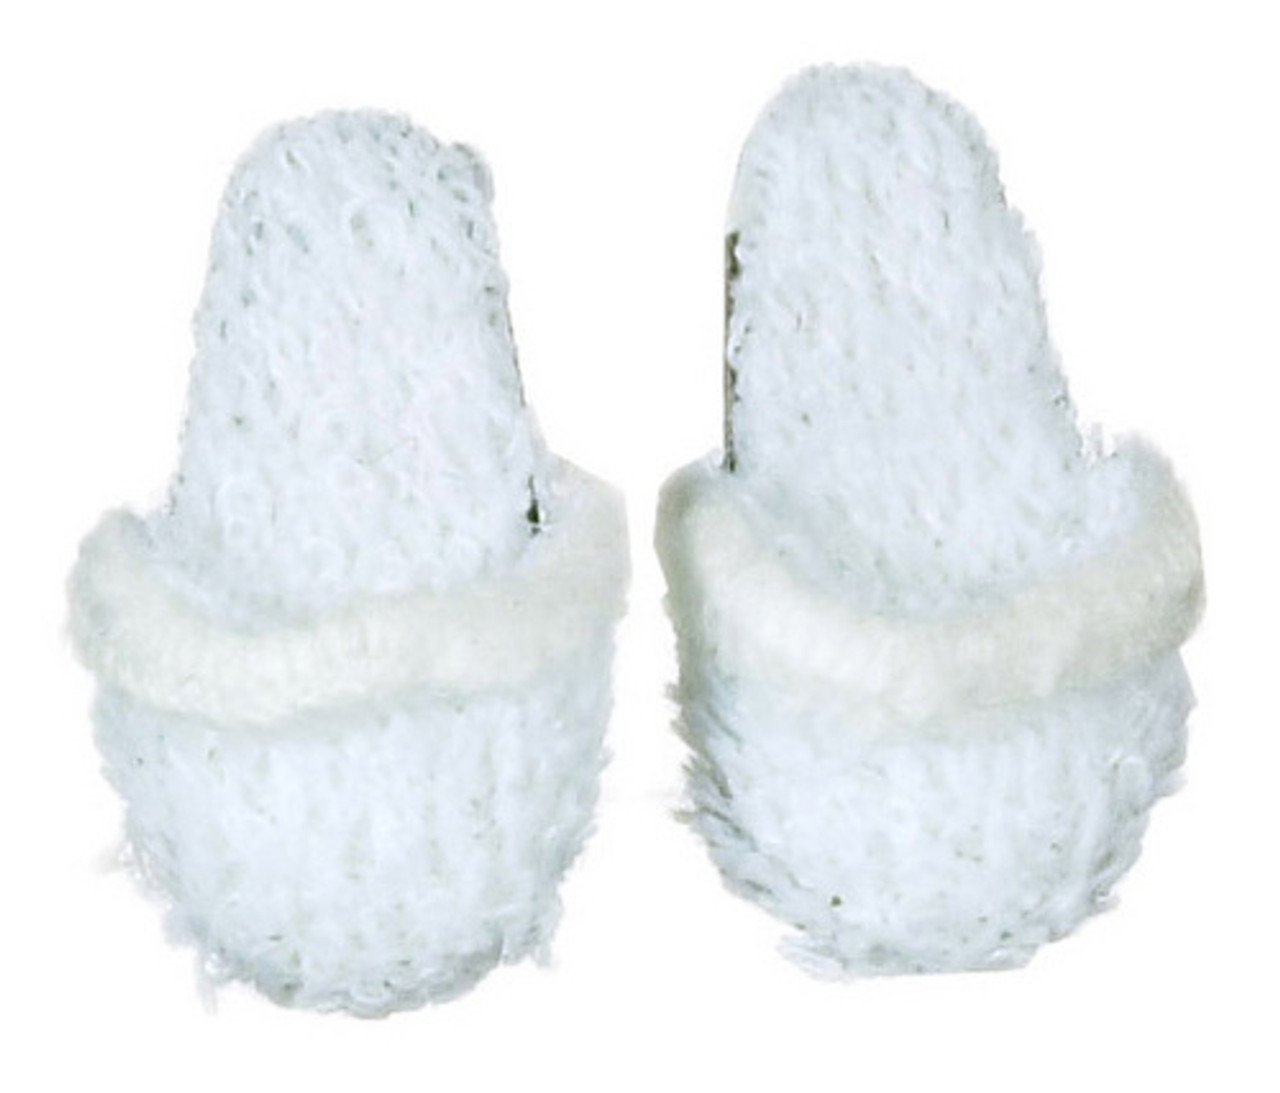 Dollhouse City - Dollhouse Miniatures Slippers - White Lace